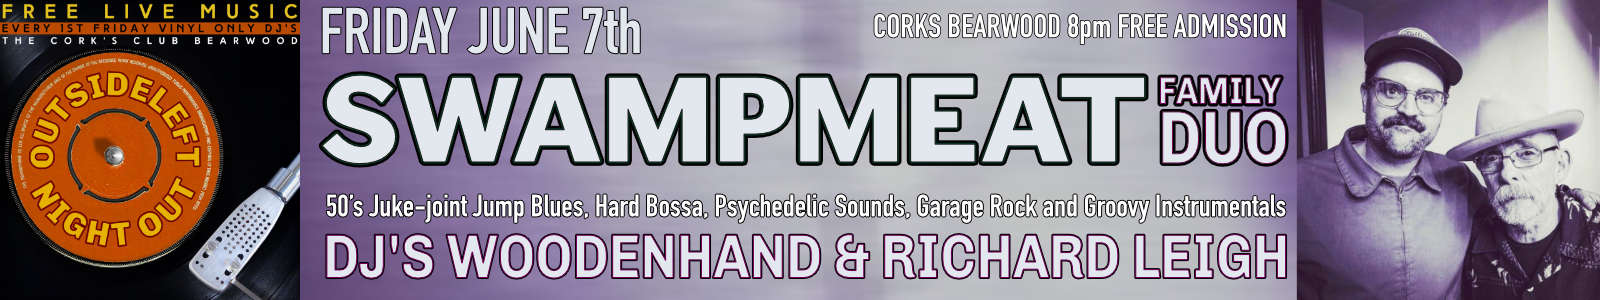 Some of Swampmeat Family Band at Corks in Bearwood on Friday June 7th web banner